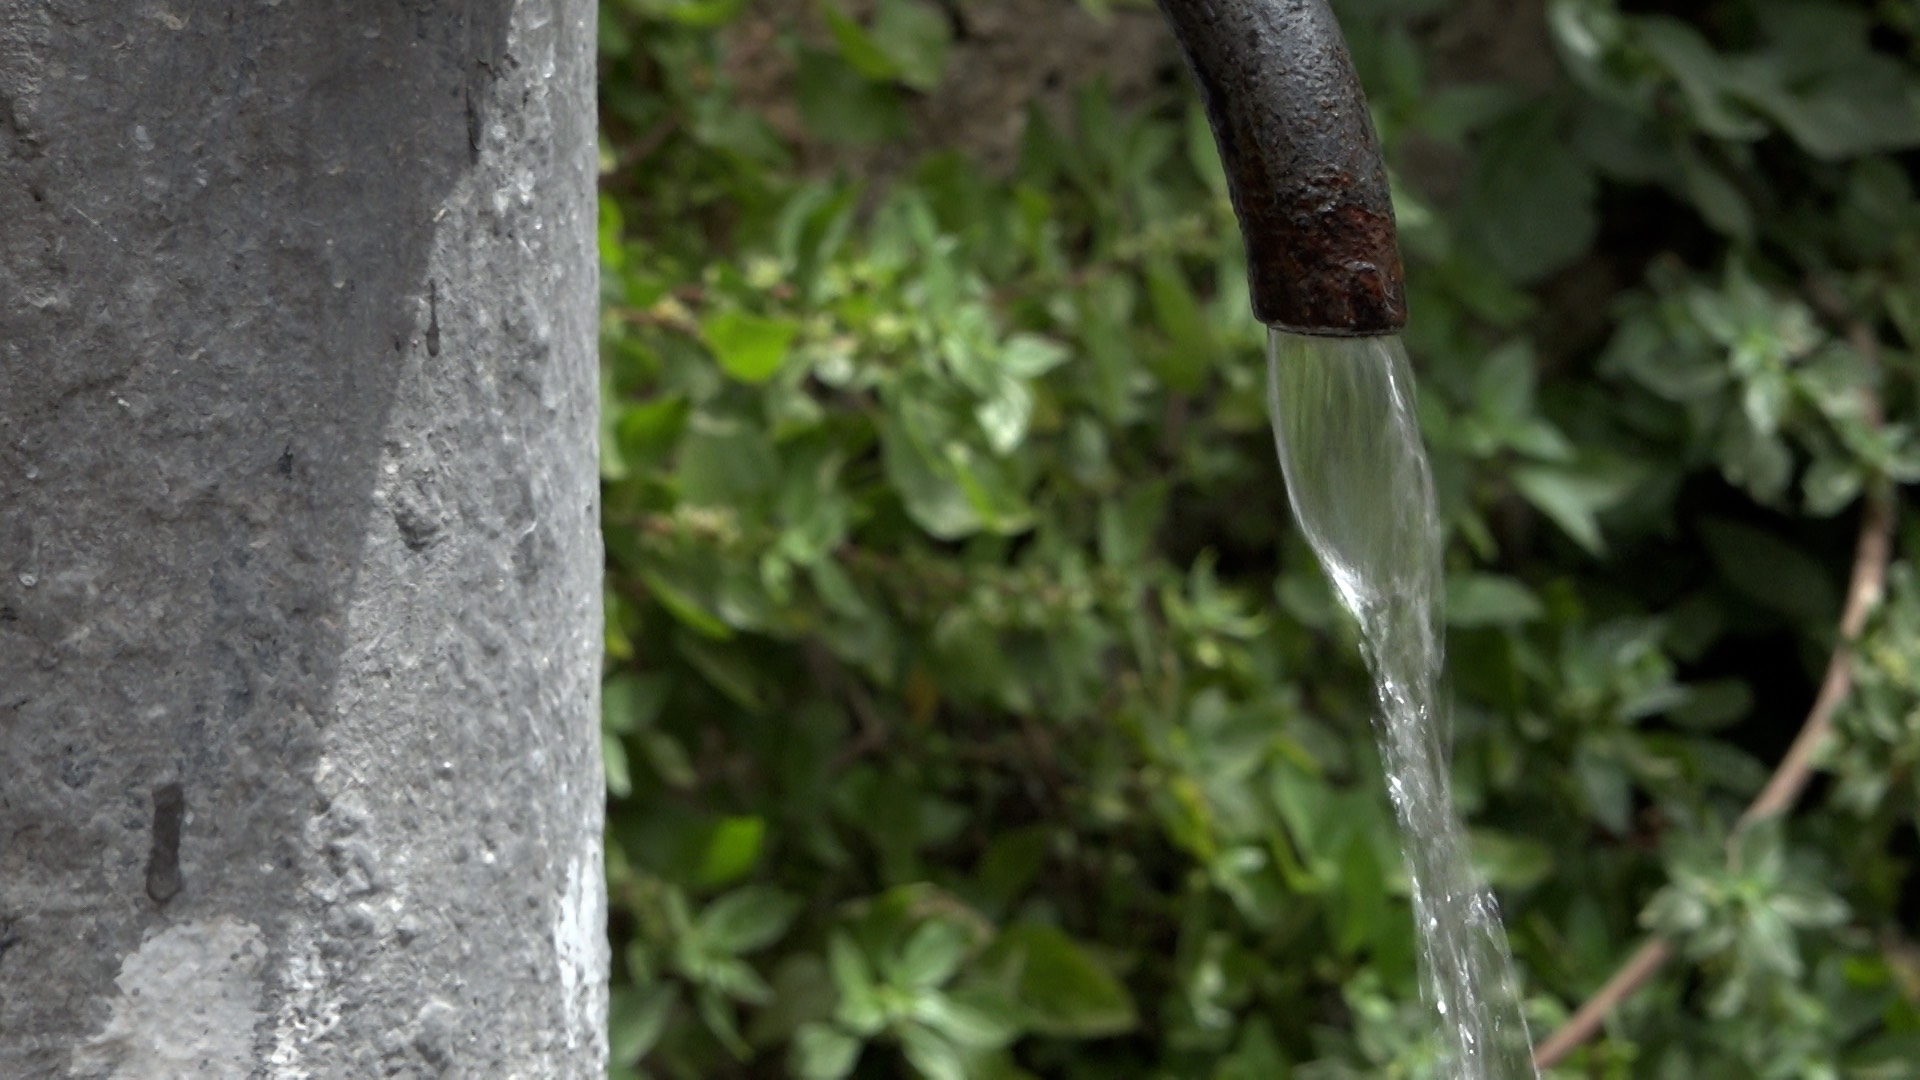 Traditional water fountains or nasoni can be found all across Rome. /CGTN